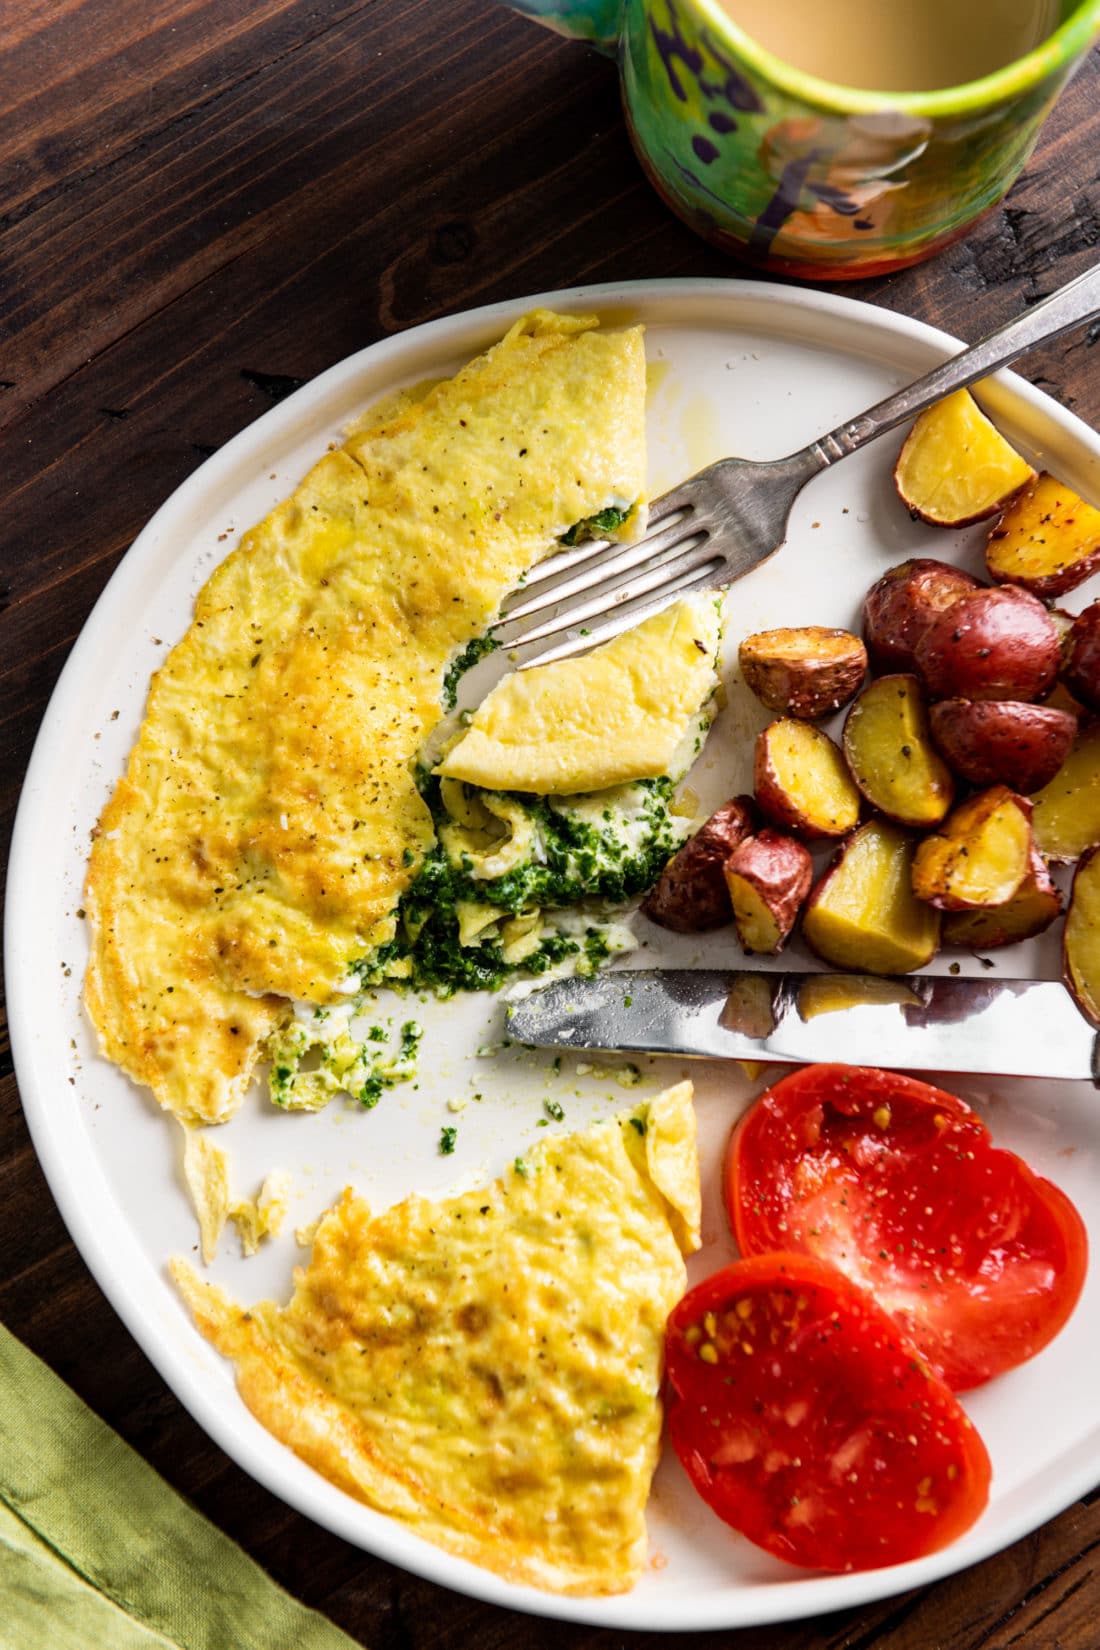 Kale Pesto and Goat Cheese Omelet